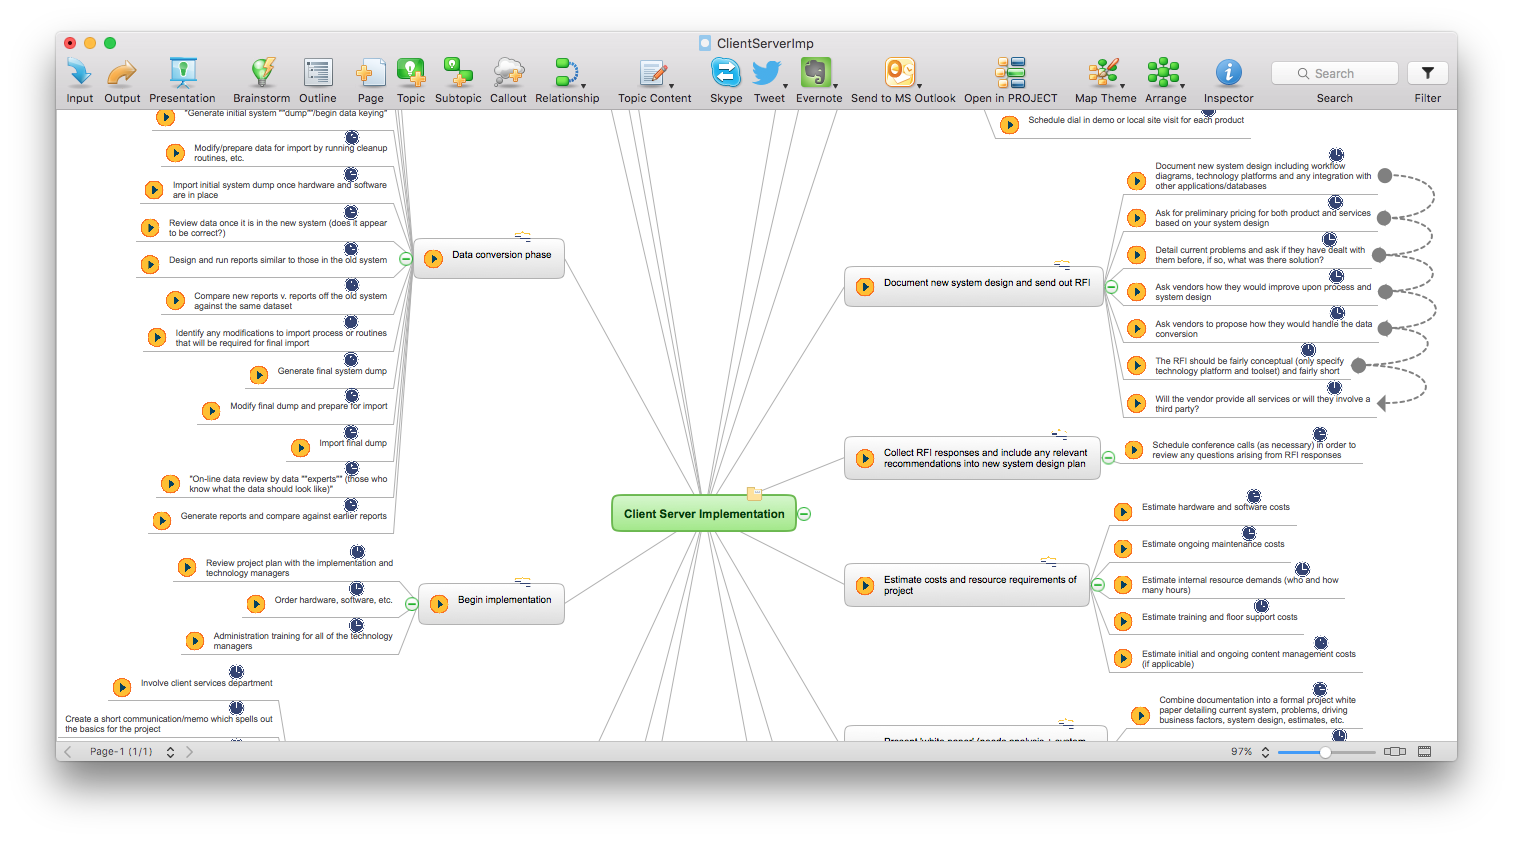 Mind map generated from MS Project file